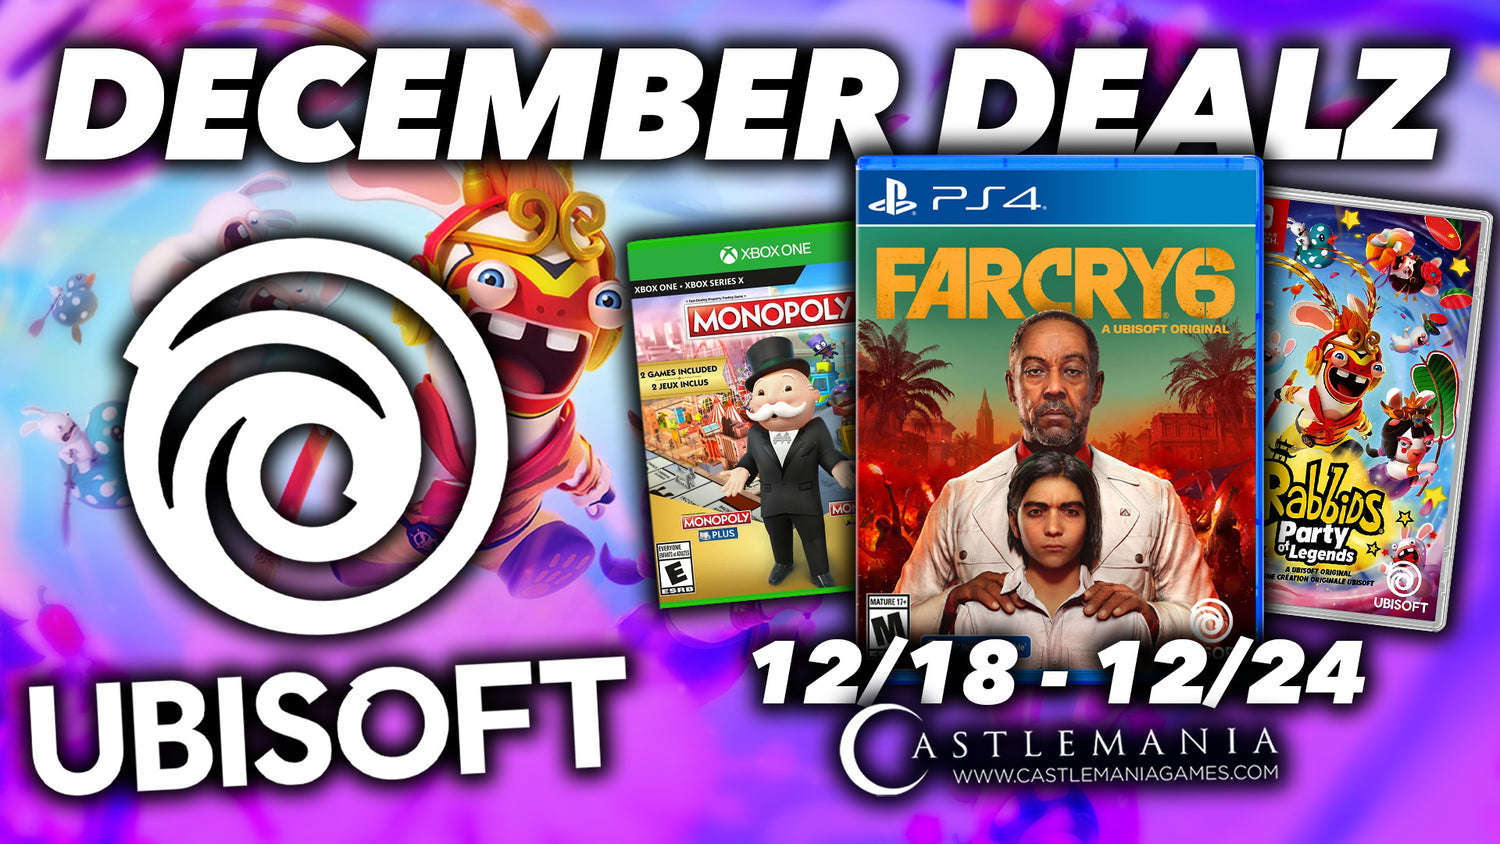 Save on Dealz from Ubisoft now through December 24th!